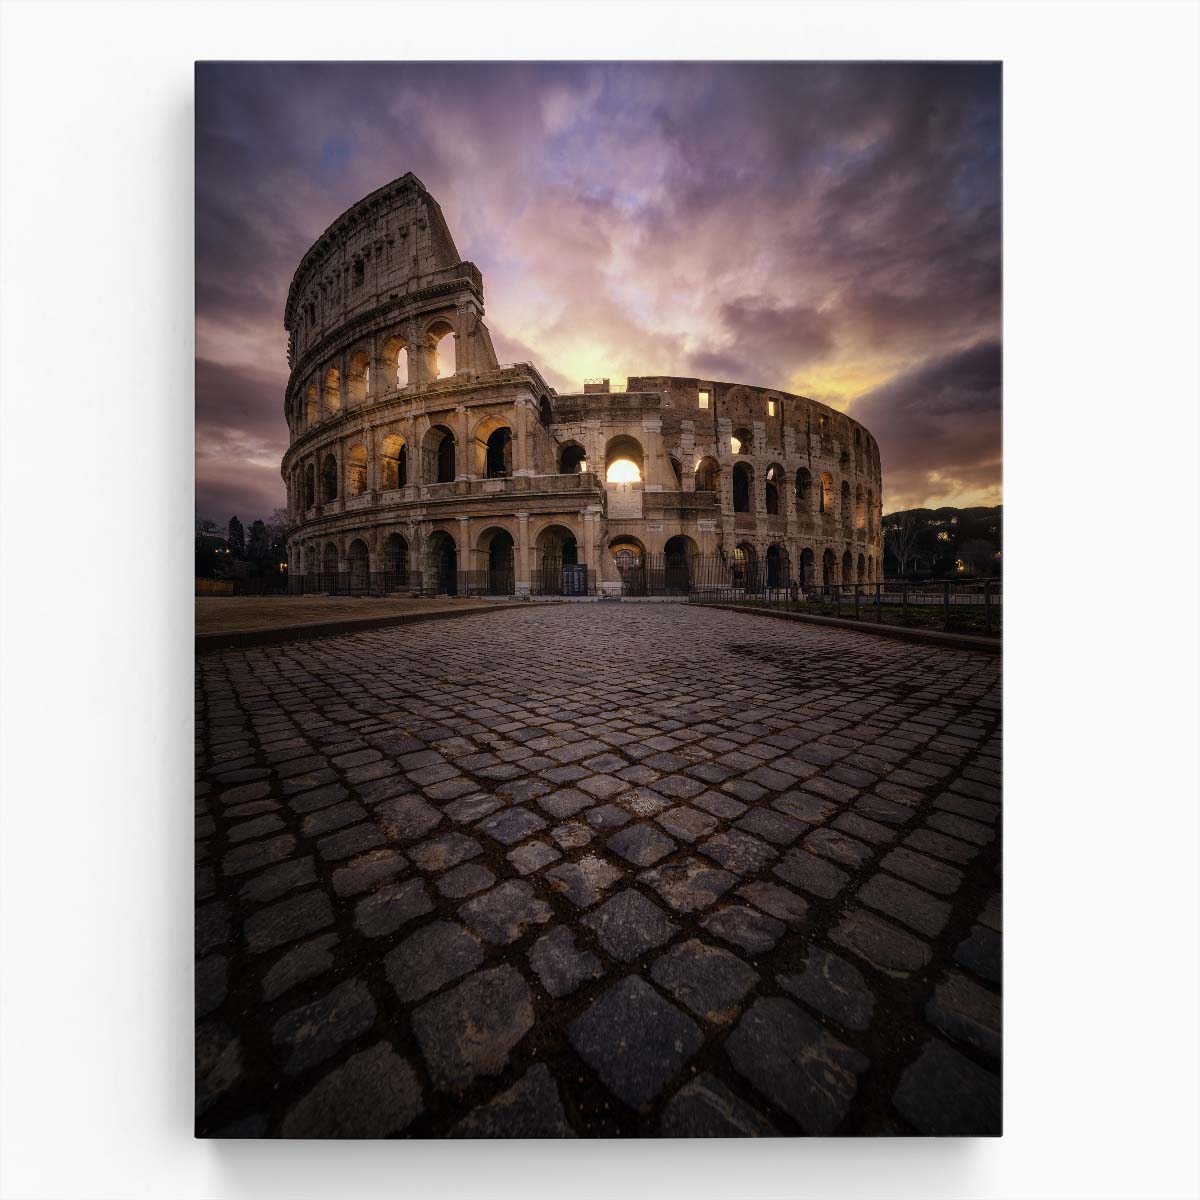 Iconic Colosseum Rome Photography Ancient Italian Arena Artwork by Luxuriance Designs, made in USA